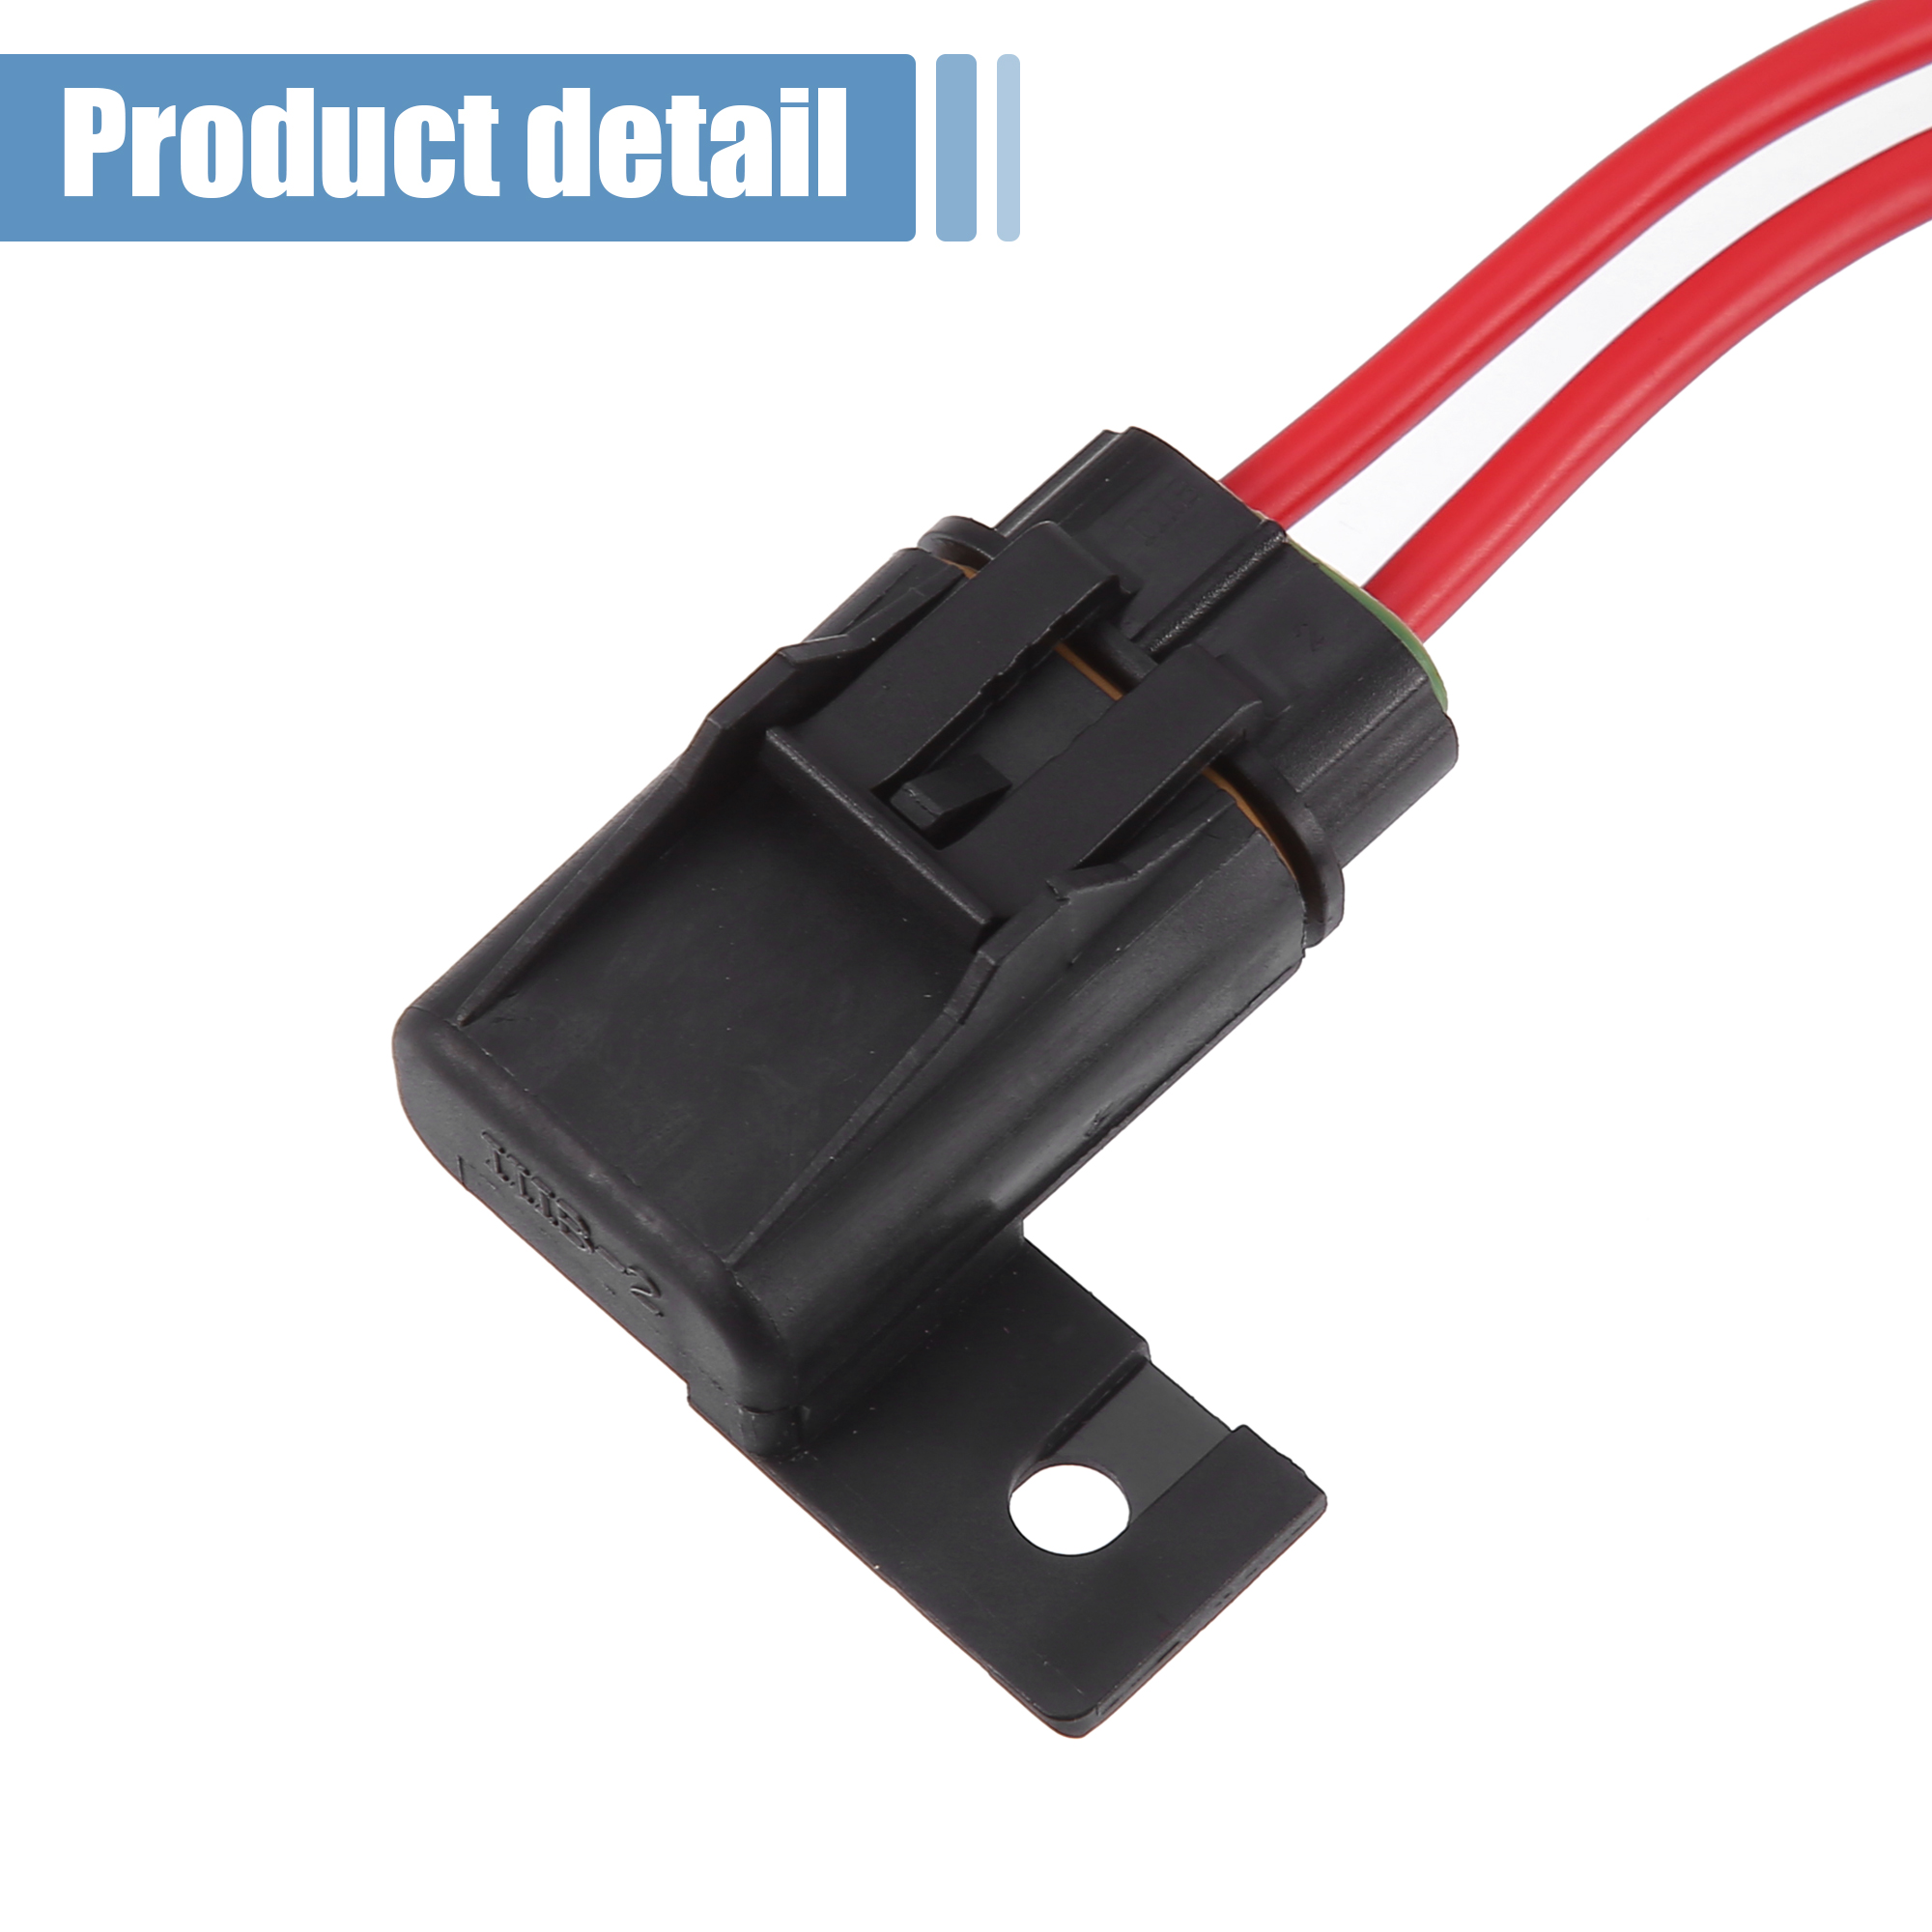 Unique Bargains 7 Set Car Inline Fuse Holder Blade Style ATO/ATC Holder 20A 12A Wire Harness